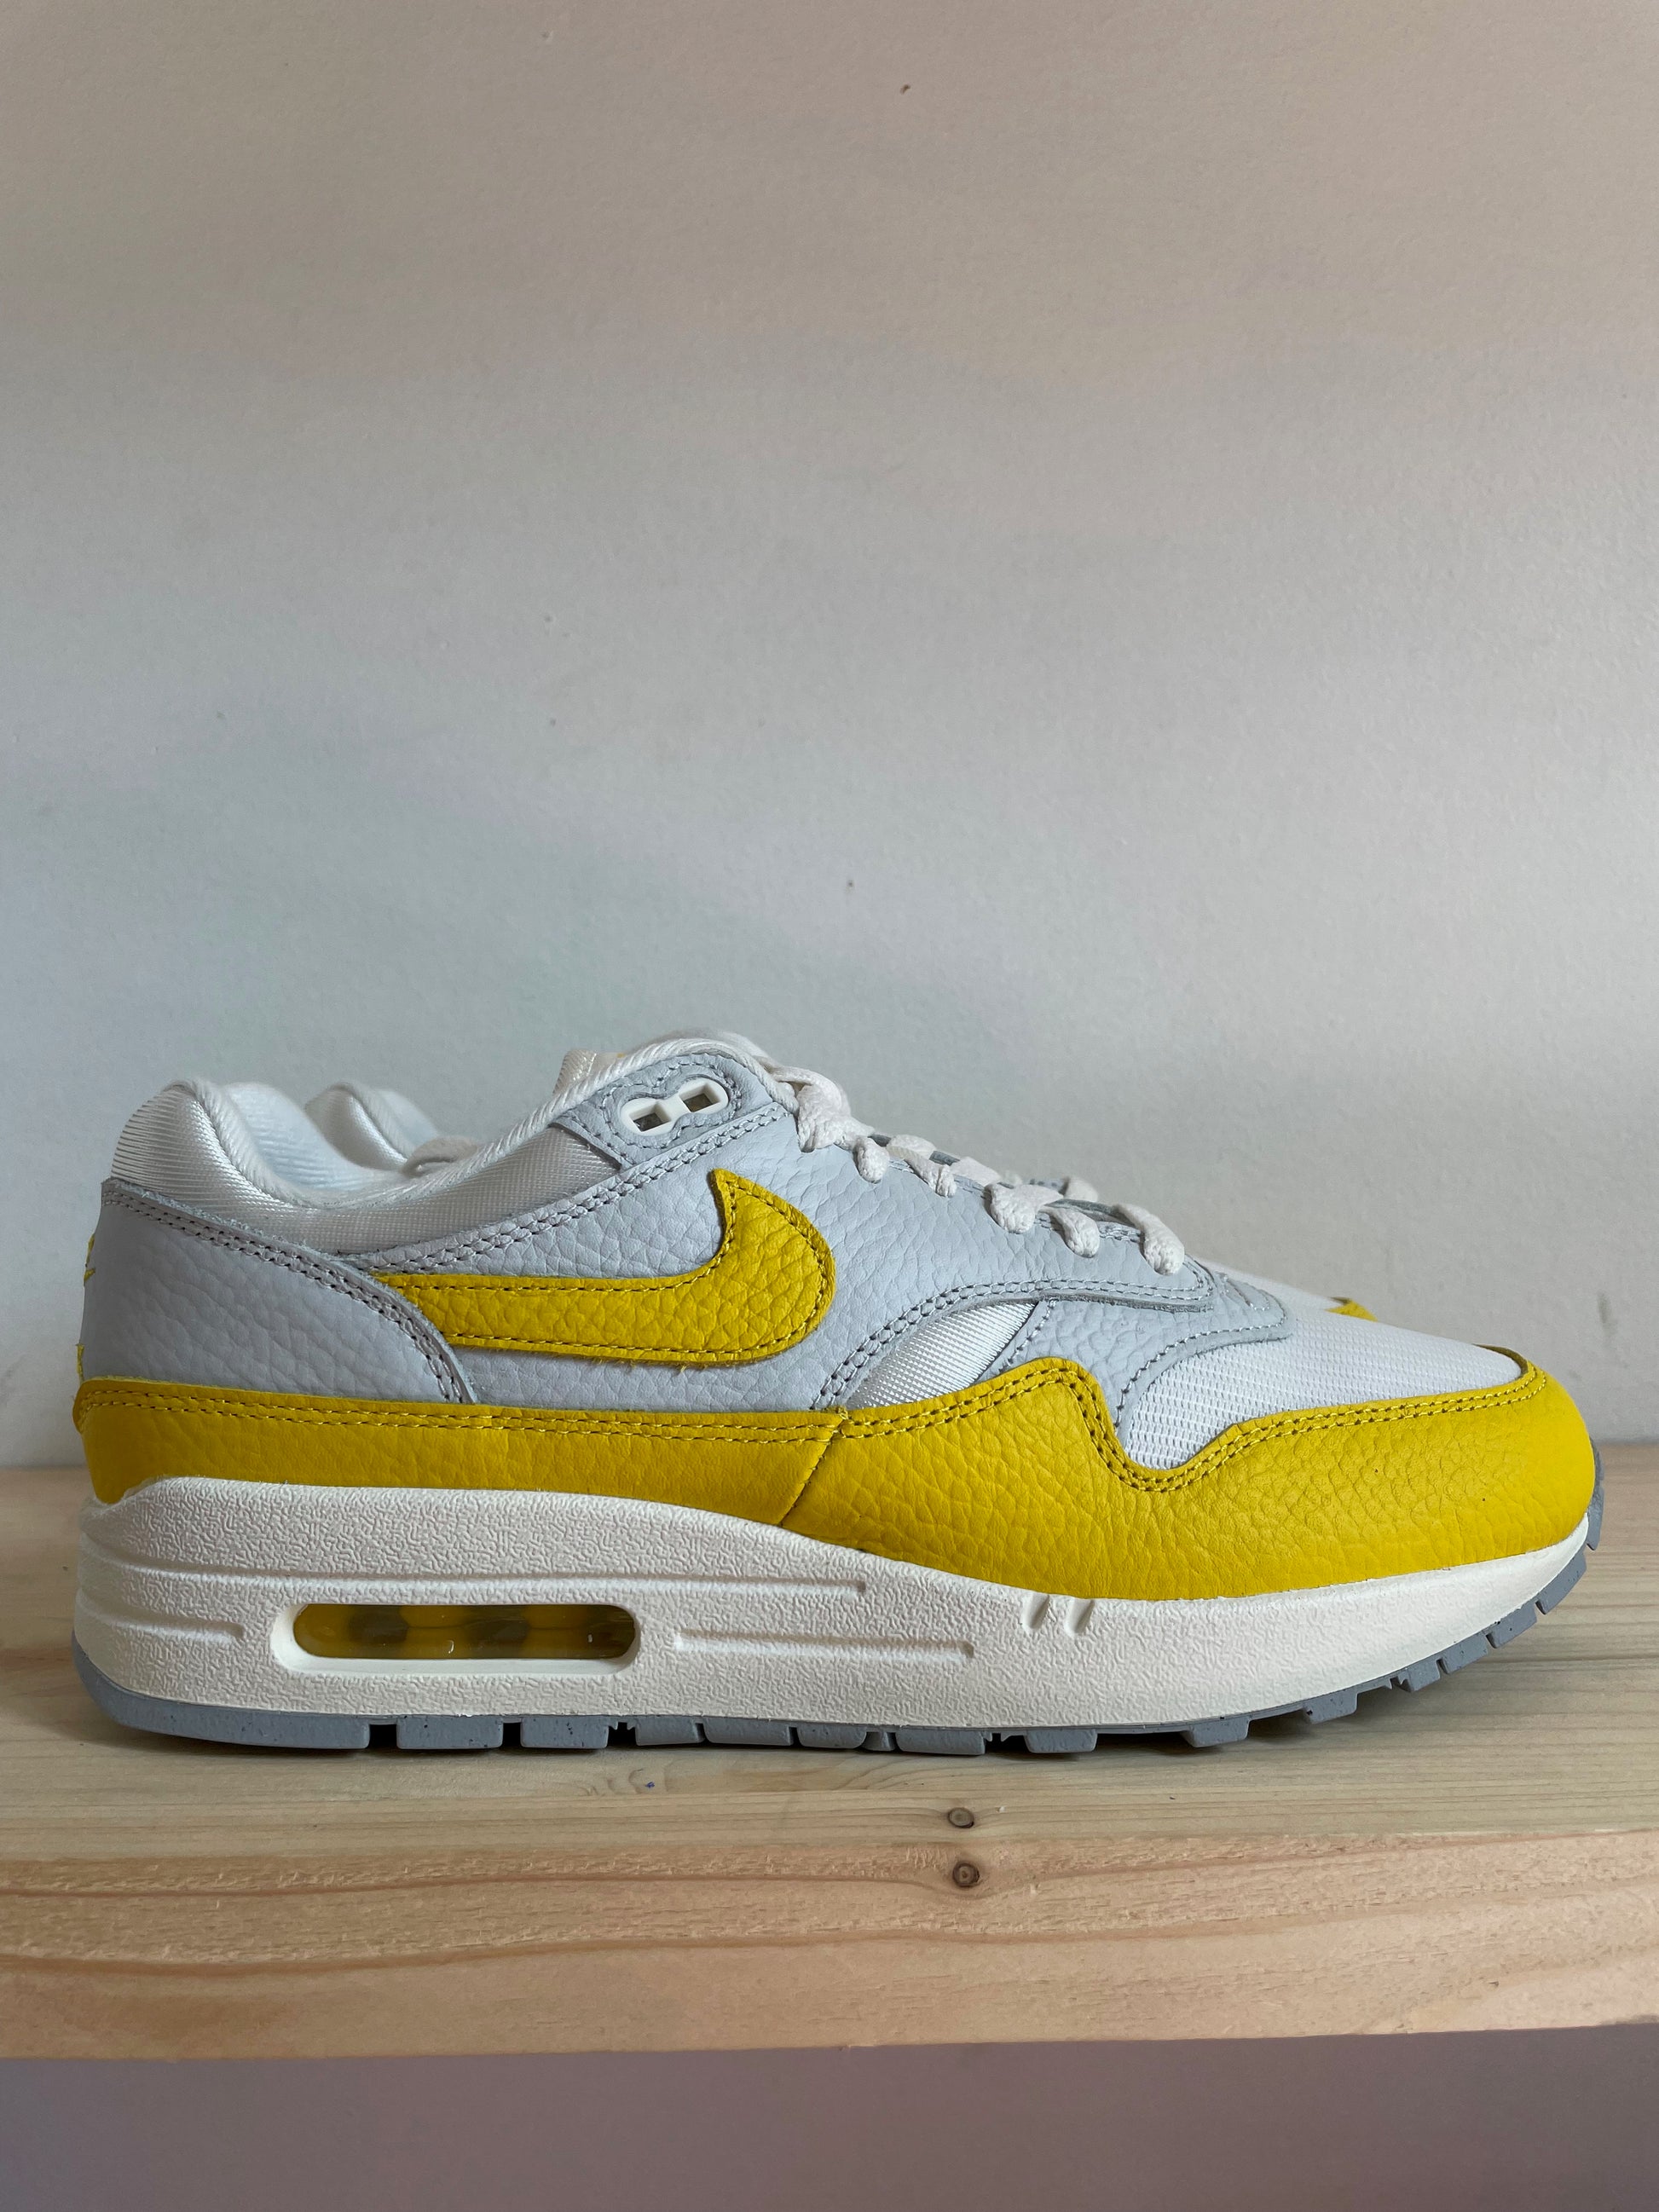 Nike Air Max 1 Yellow (W) – snkr